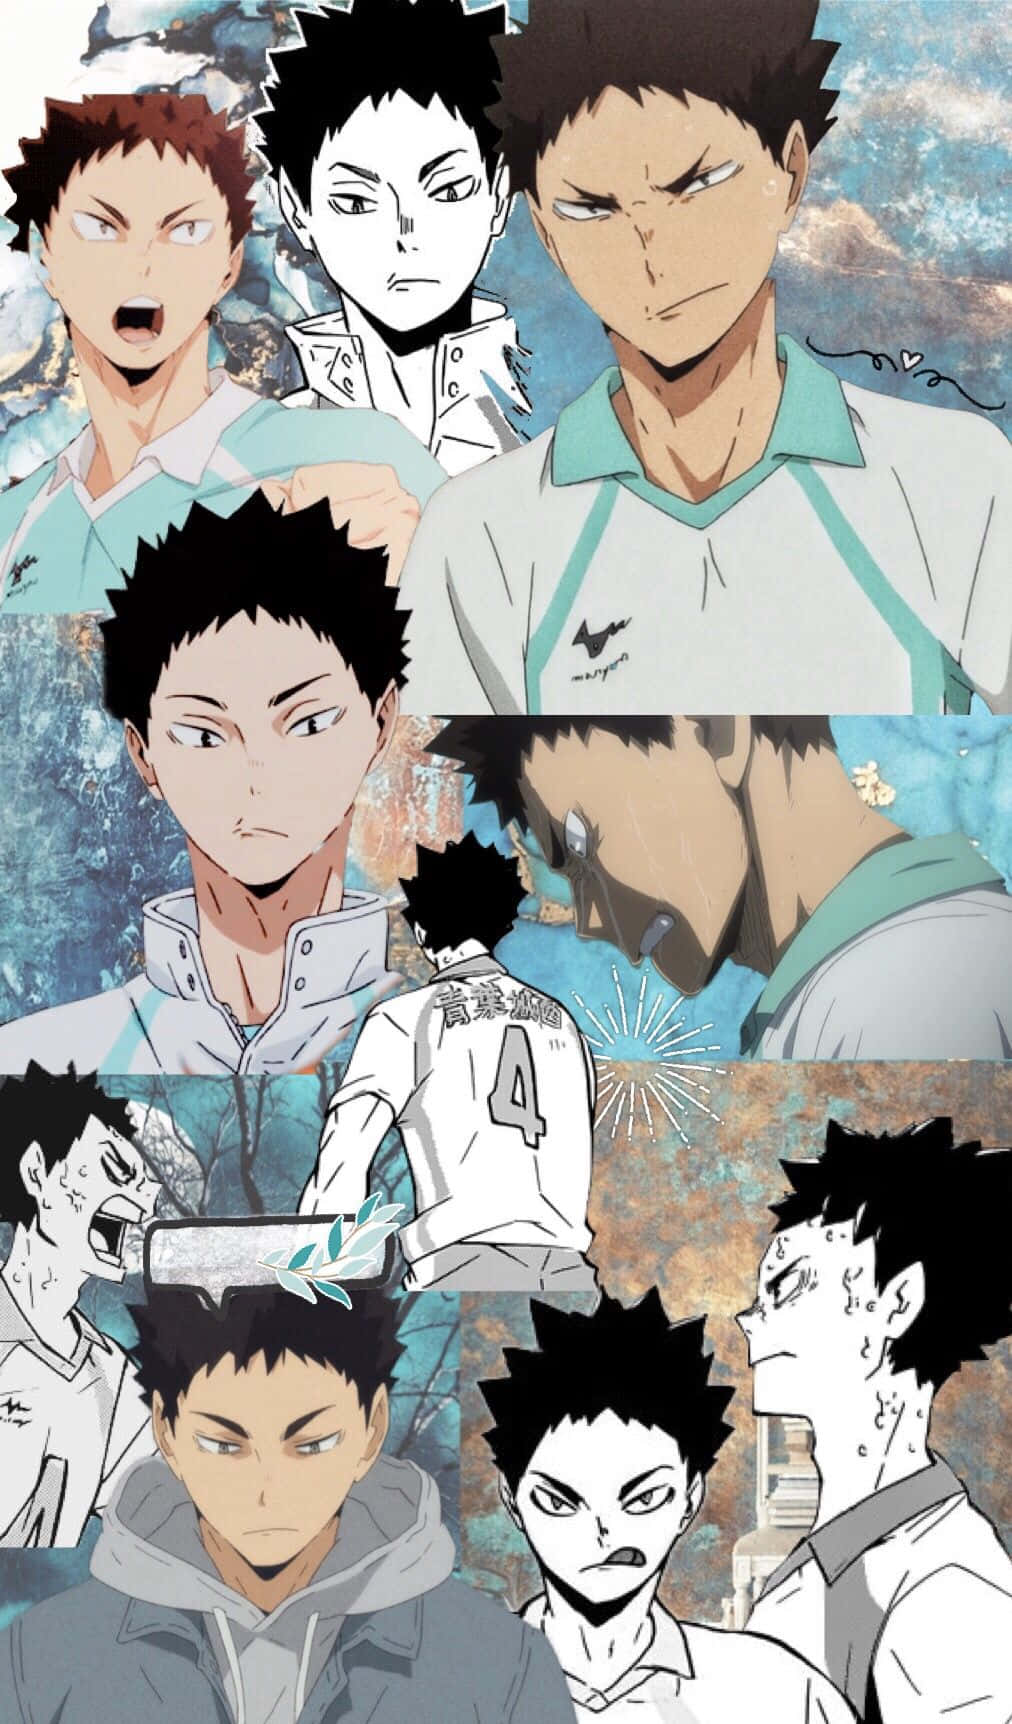 Iwaizumi Hajime In Action, Striking A Volleyball During A Match